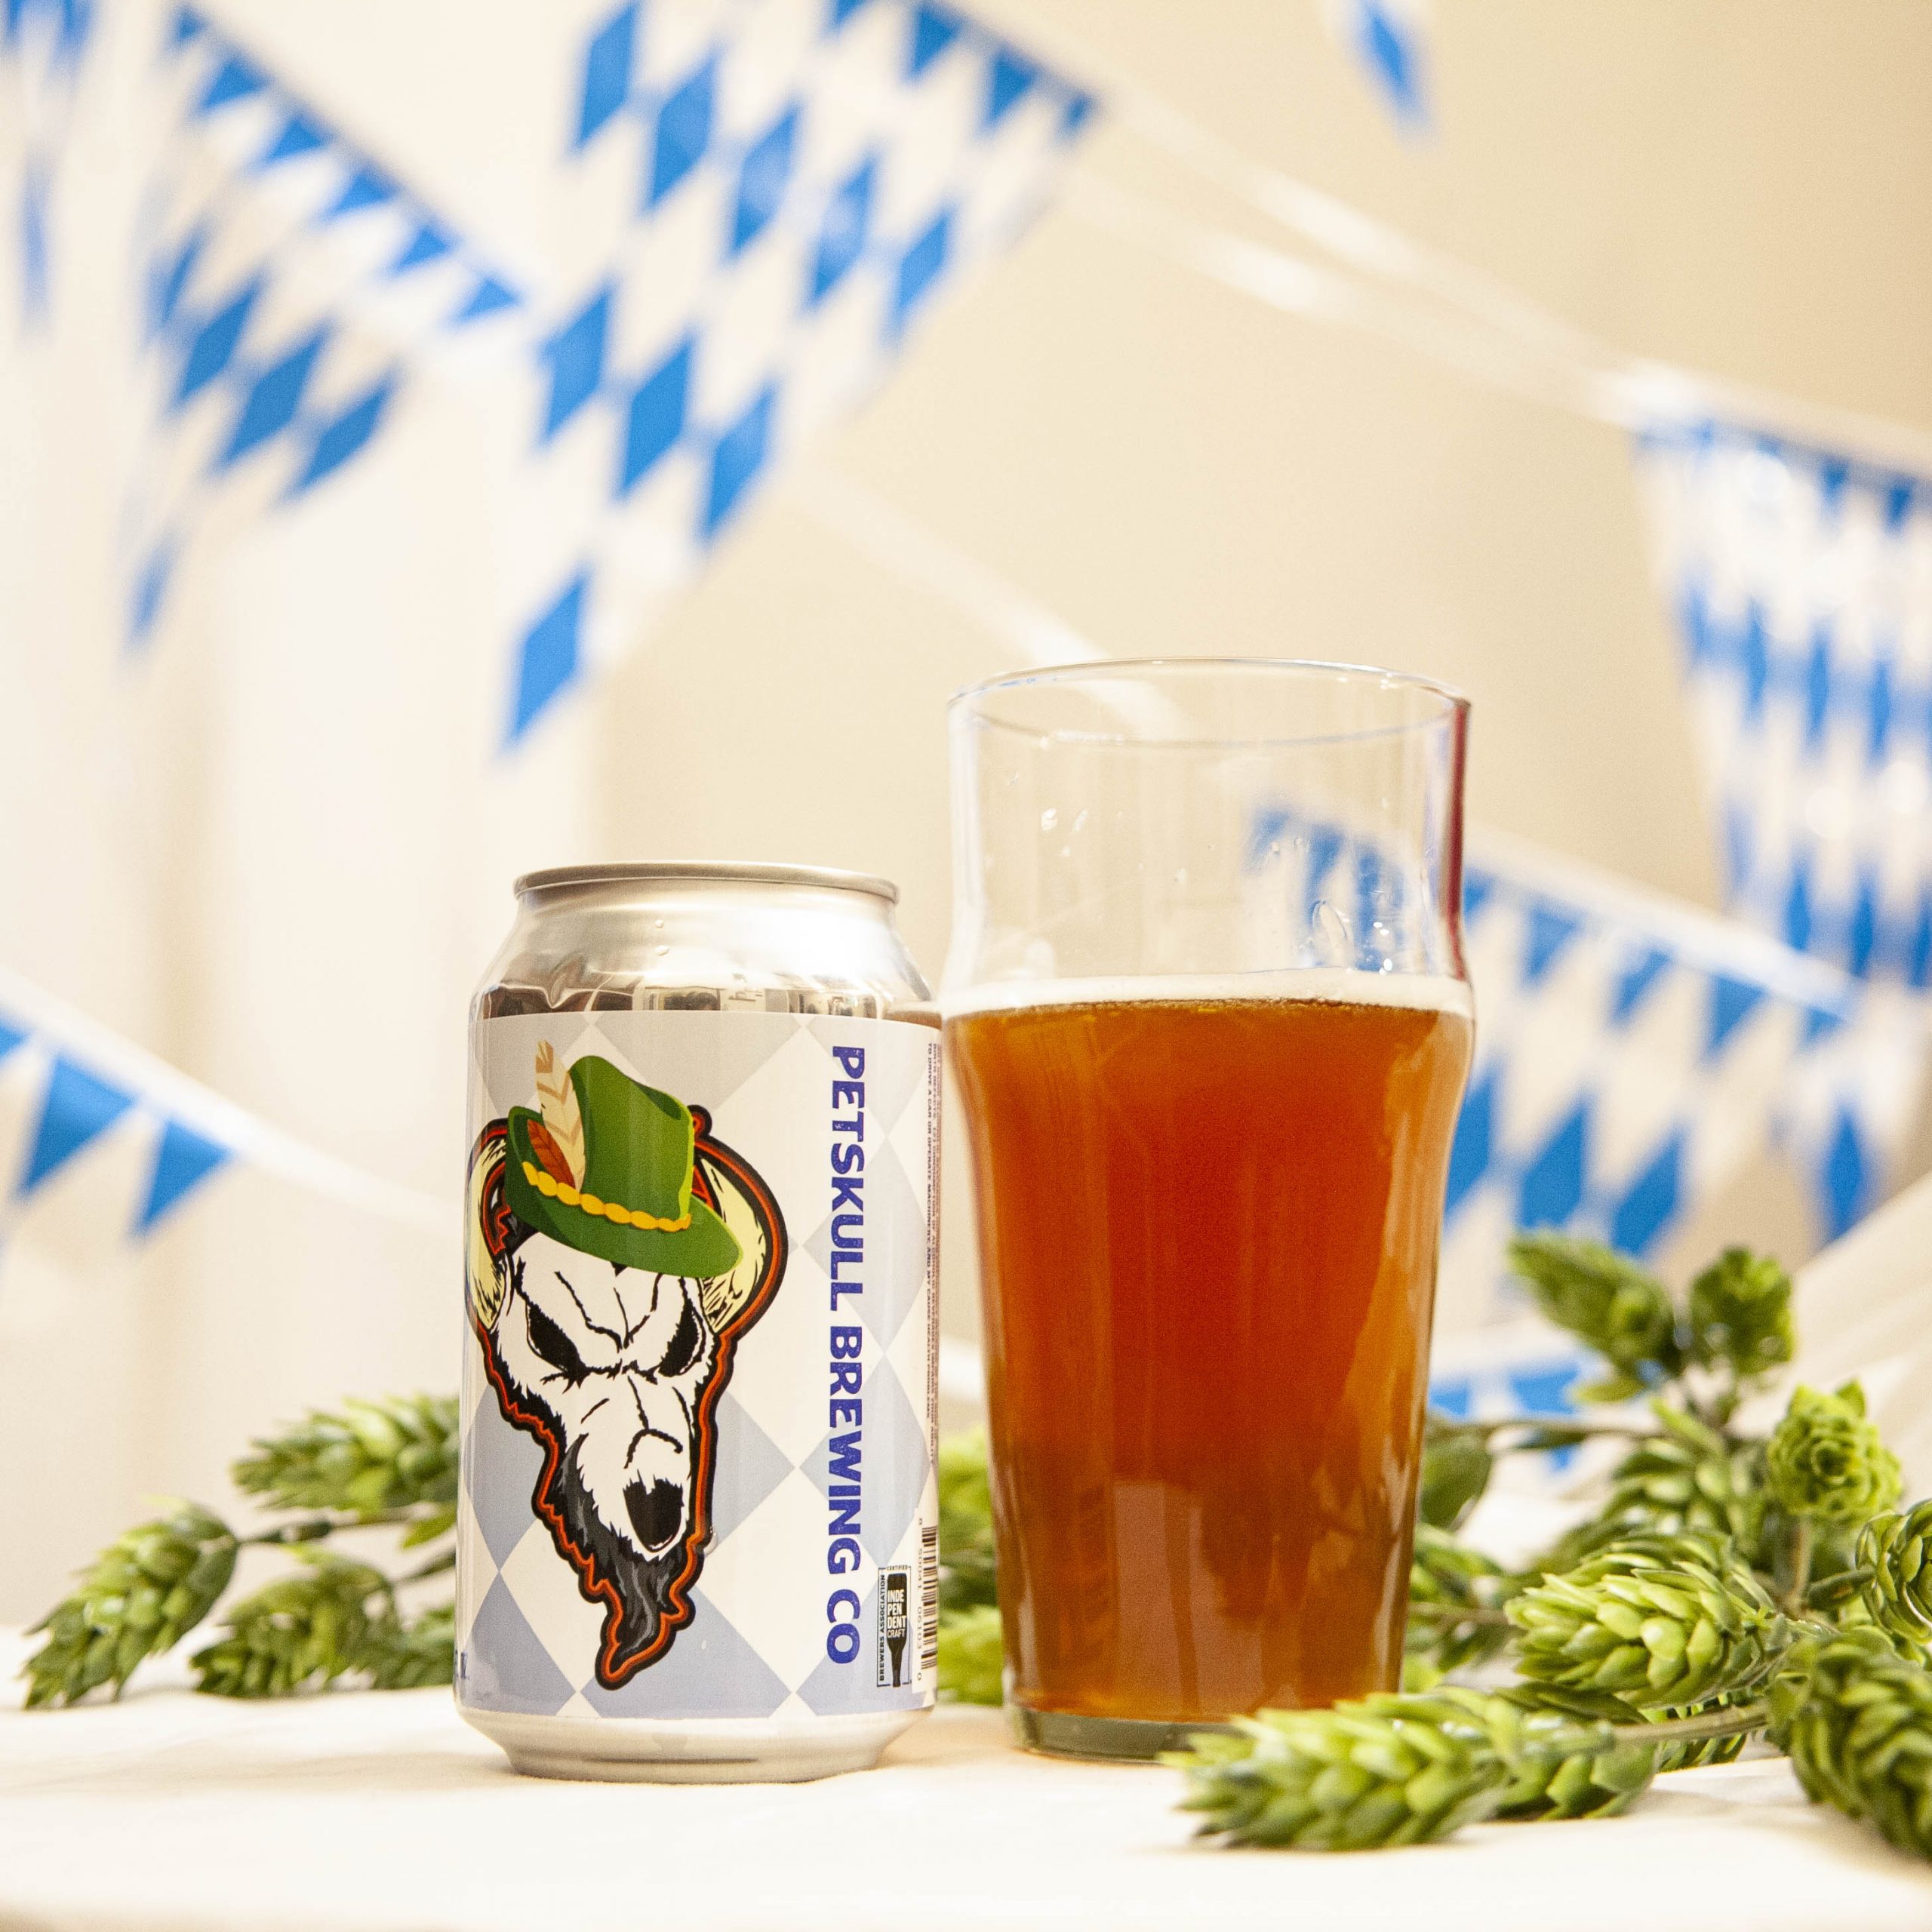 PetSkull's Hofftoberfest lager is poured into a nonick pint glass, amidst hop cones and white and blue bunting.